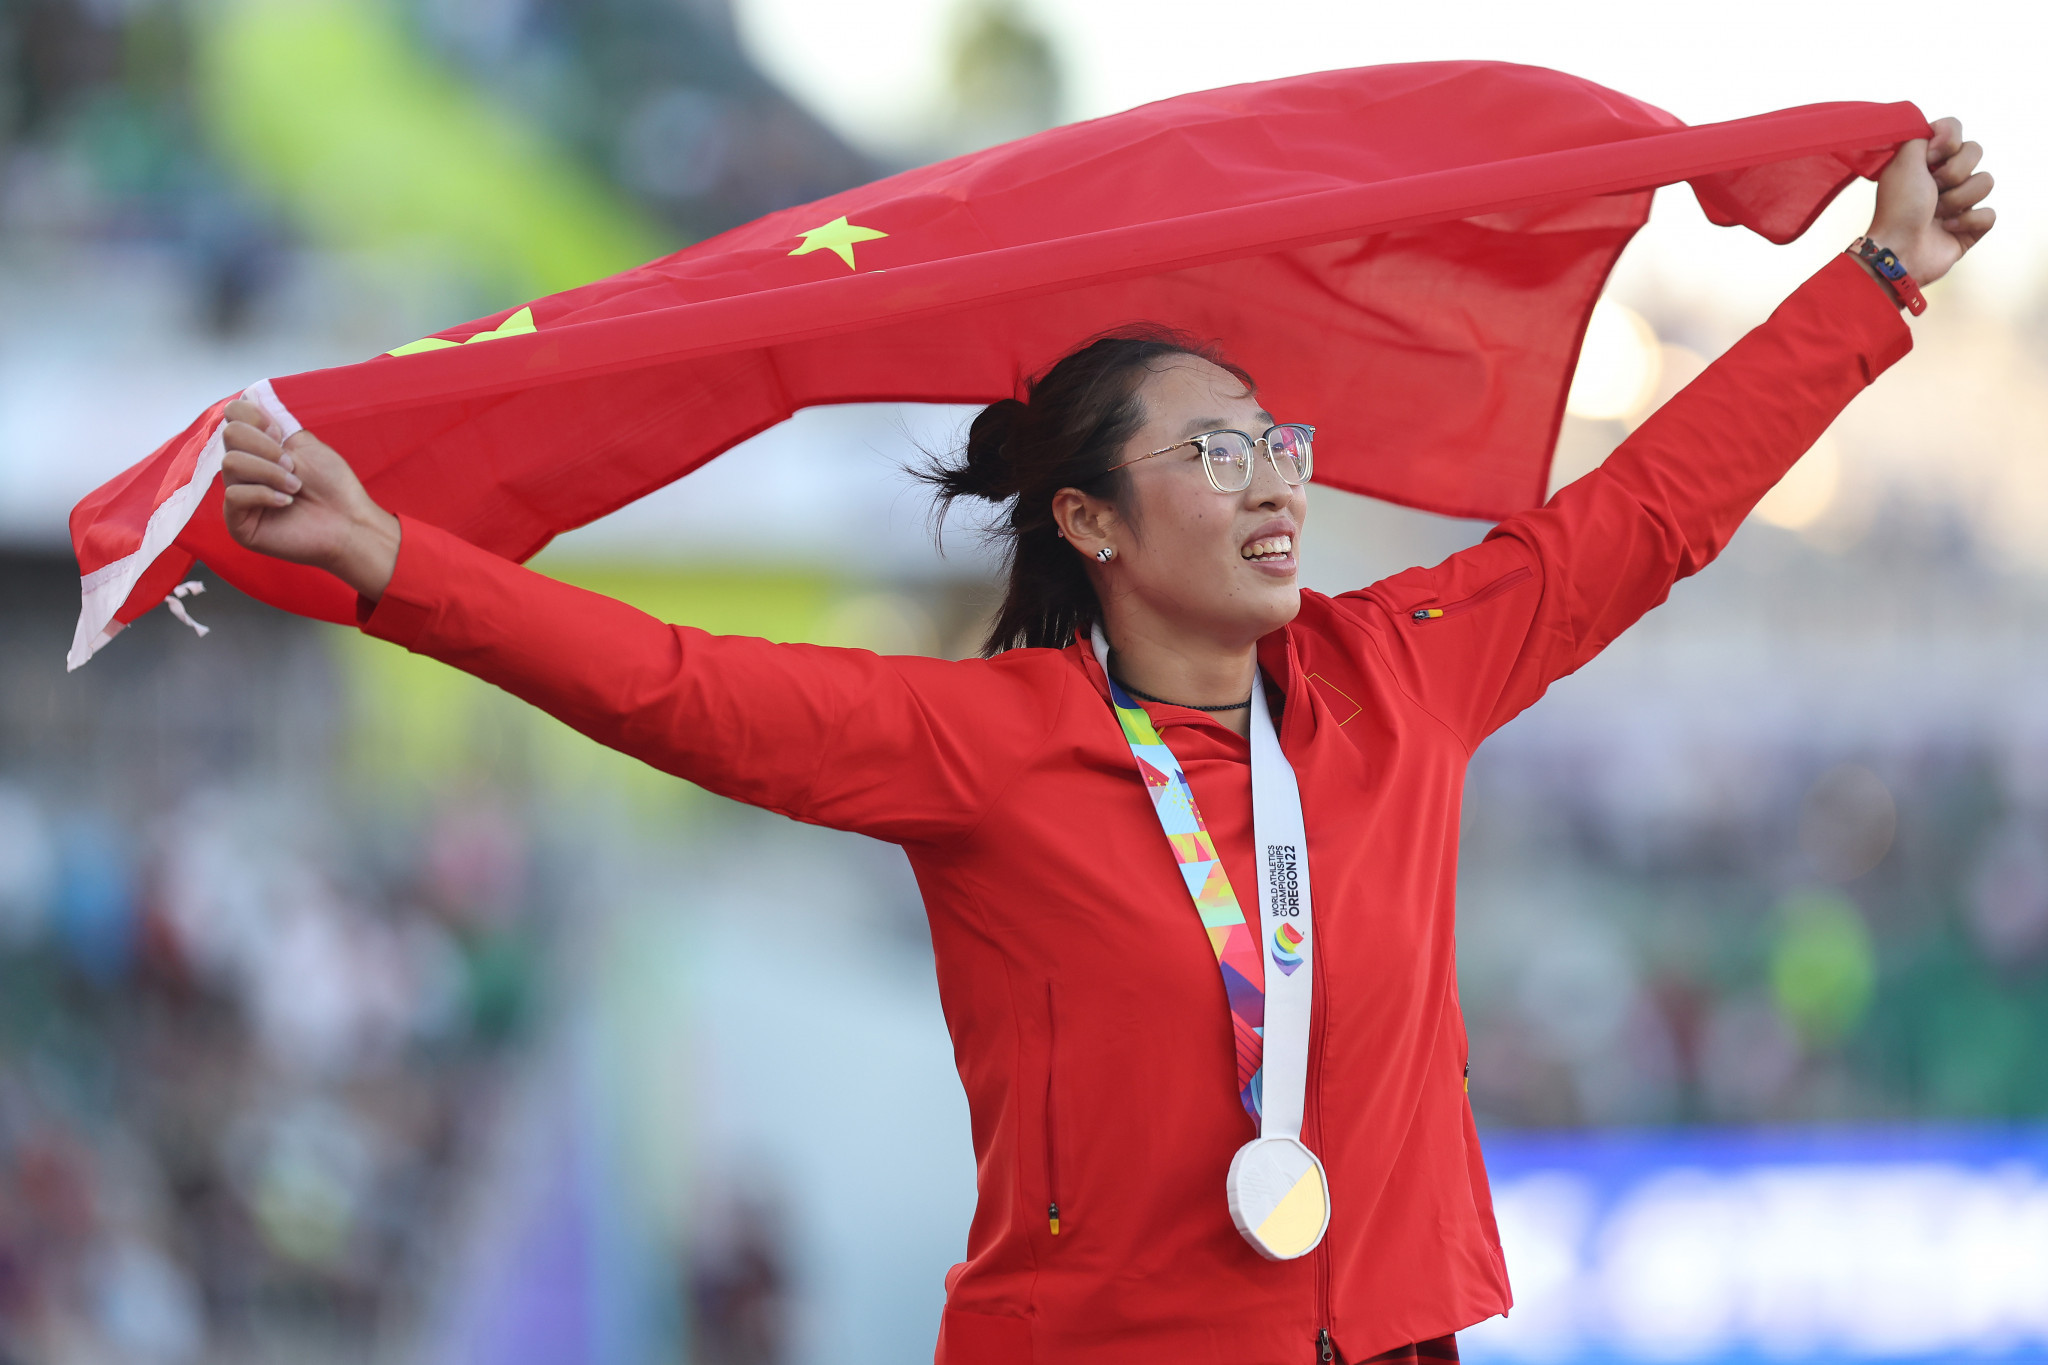 Bin Feng of China won the women's discus final after throwing a personal best 69.12 metres on her first attempt in the circle ©Getty Images